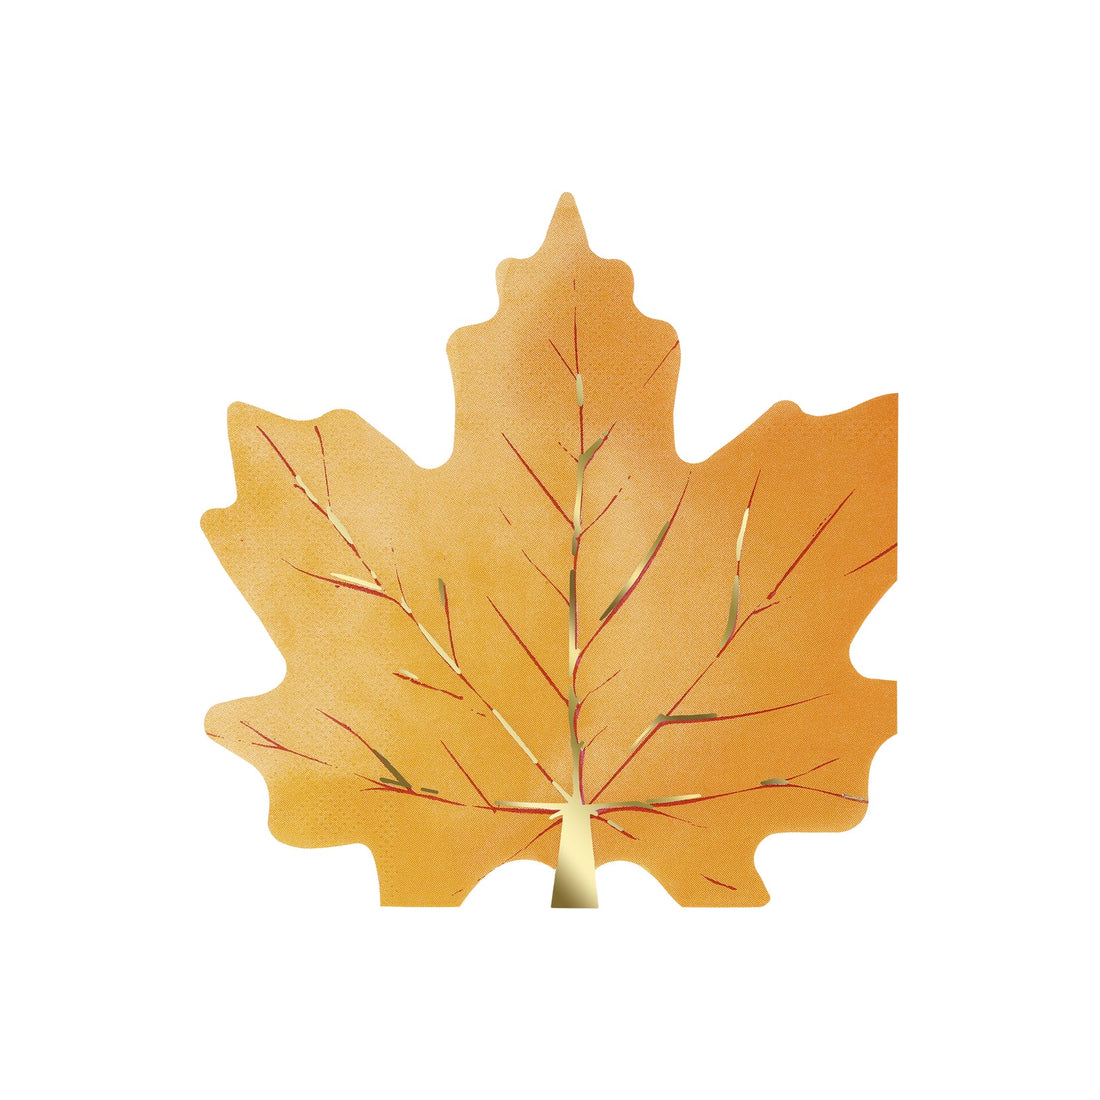 Maple Leaf Shaped paper napkin in varying gold colors.